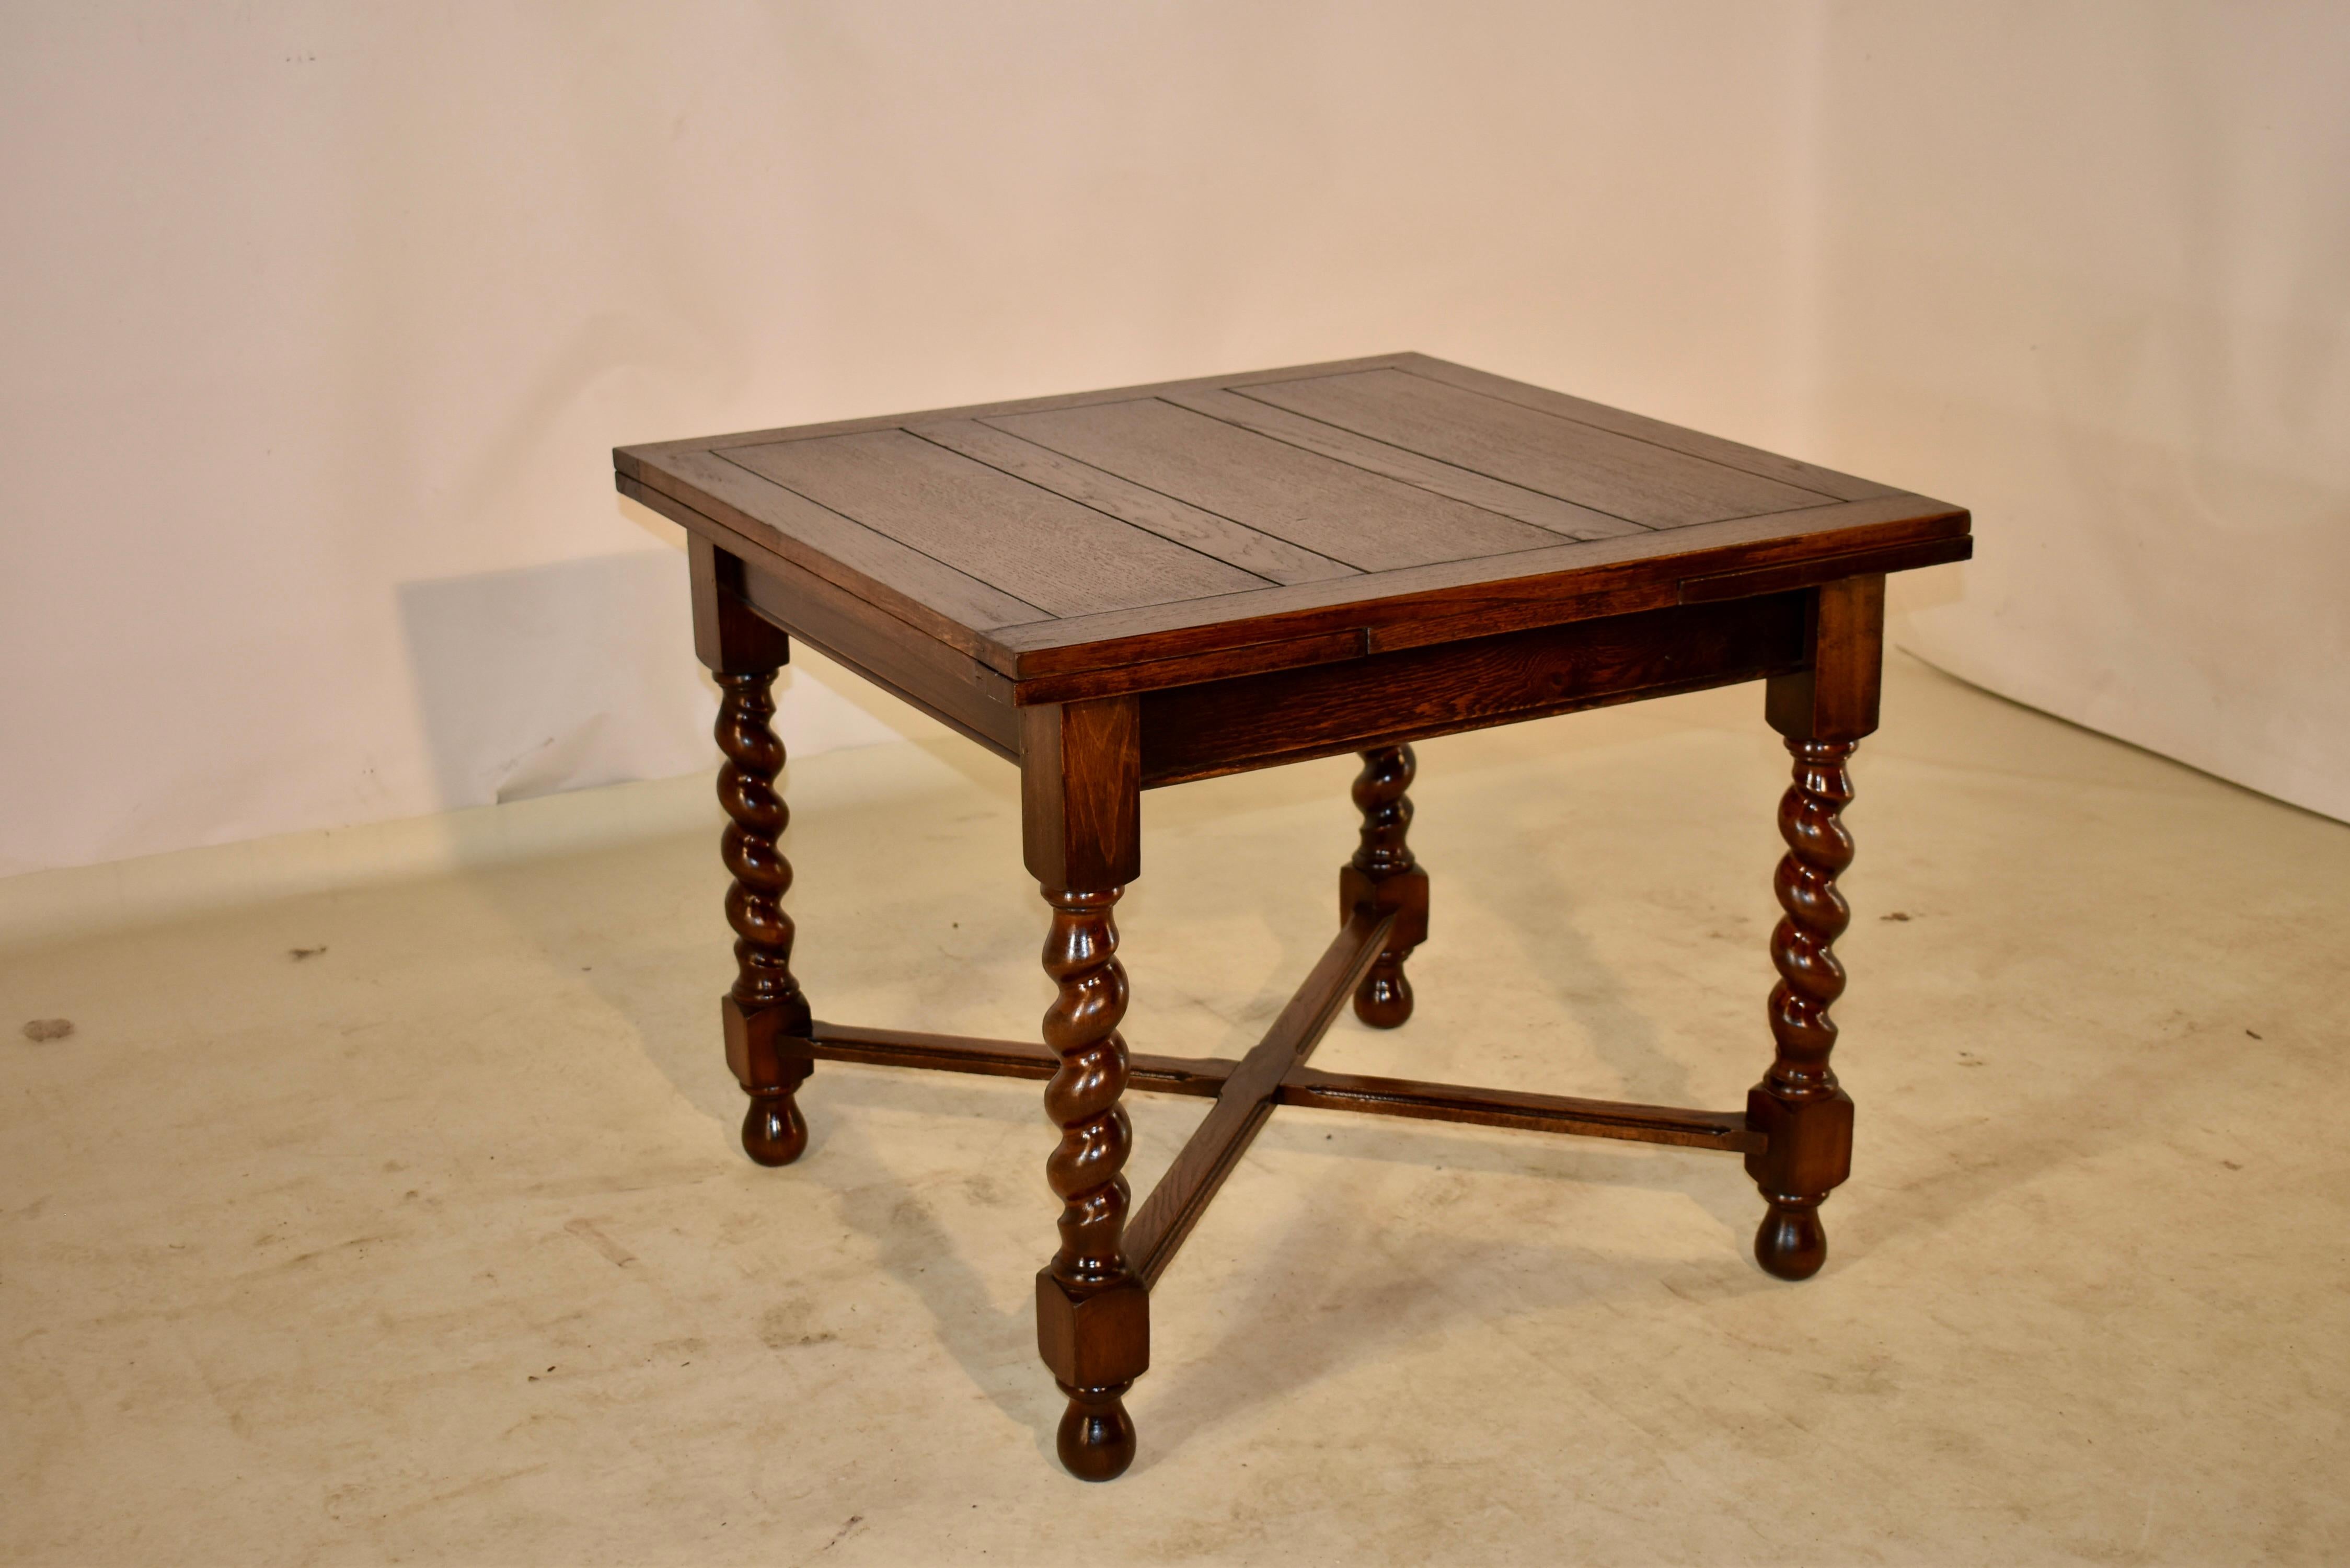 Edwardian oak pub table with draw leaves, c. 1900. The top and leaves are paneled and are supported on a simple apron following down to hand turned barley twist legs, joined by simple routed cross stretchers. The table is raised on hand turned feet.